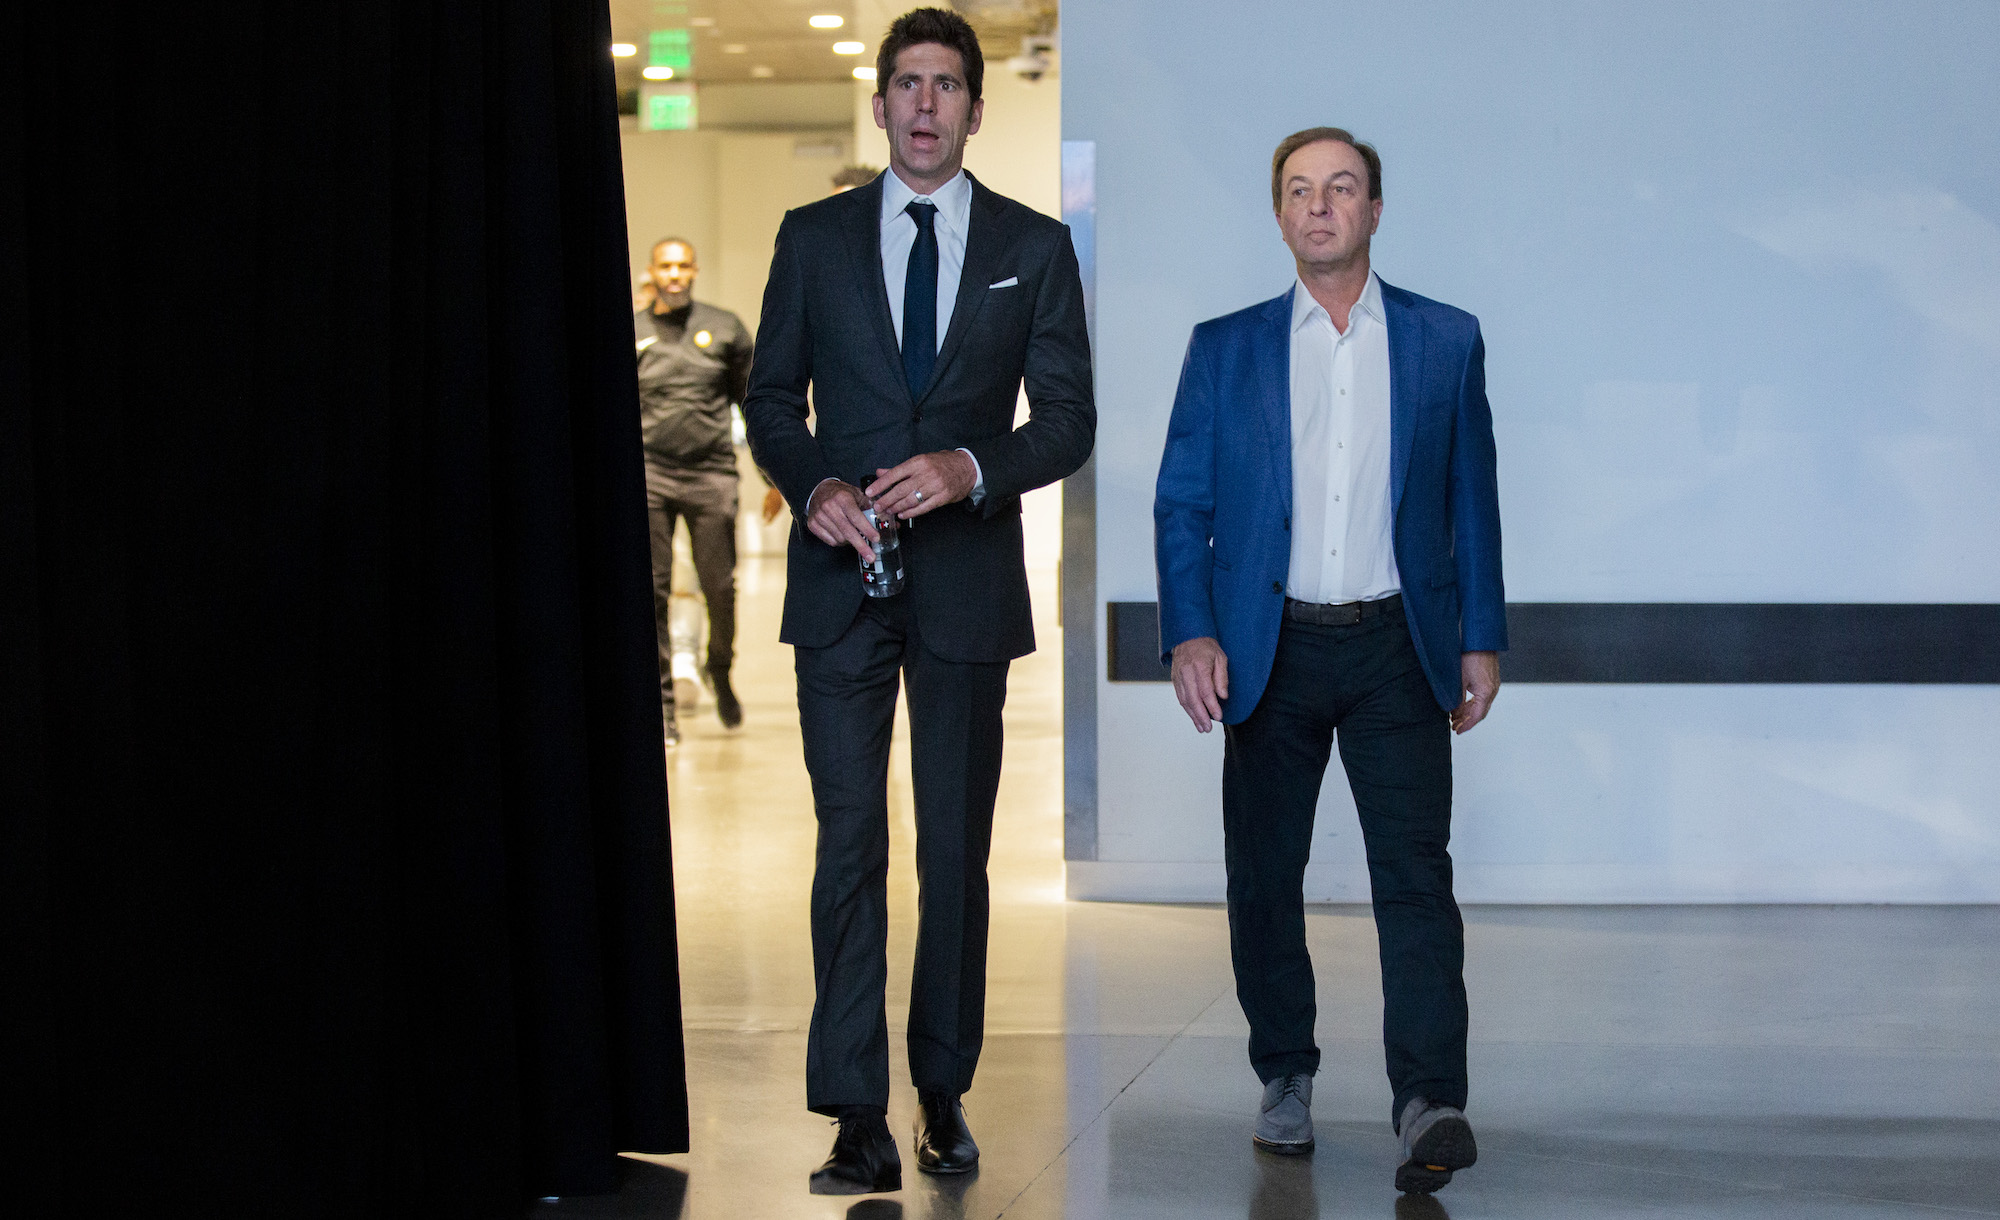 From left: Golden State Warriors general manager Bob Myers and Warriors majority owner Joe Lacob at Chase Center, Friday, July 30, 2021, in San Francisco, Calif. The Warriors selected Jonathan Kuminga (No. 7) and Moses Moody (No. 14) in the NBA Draft on Thursday night.